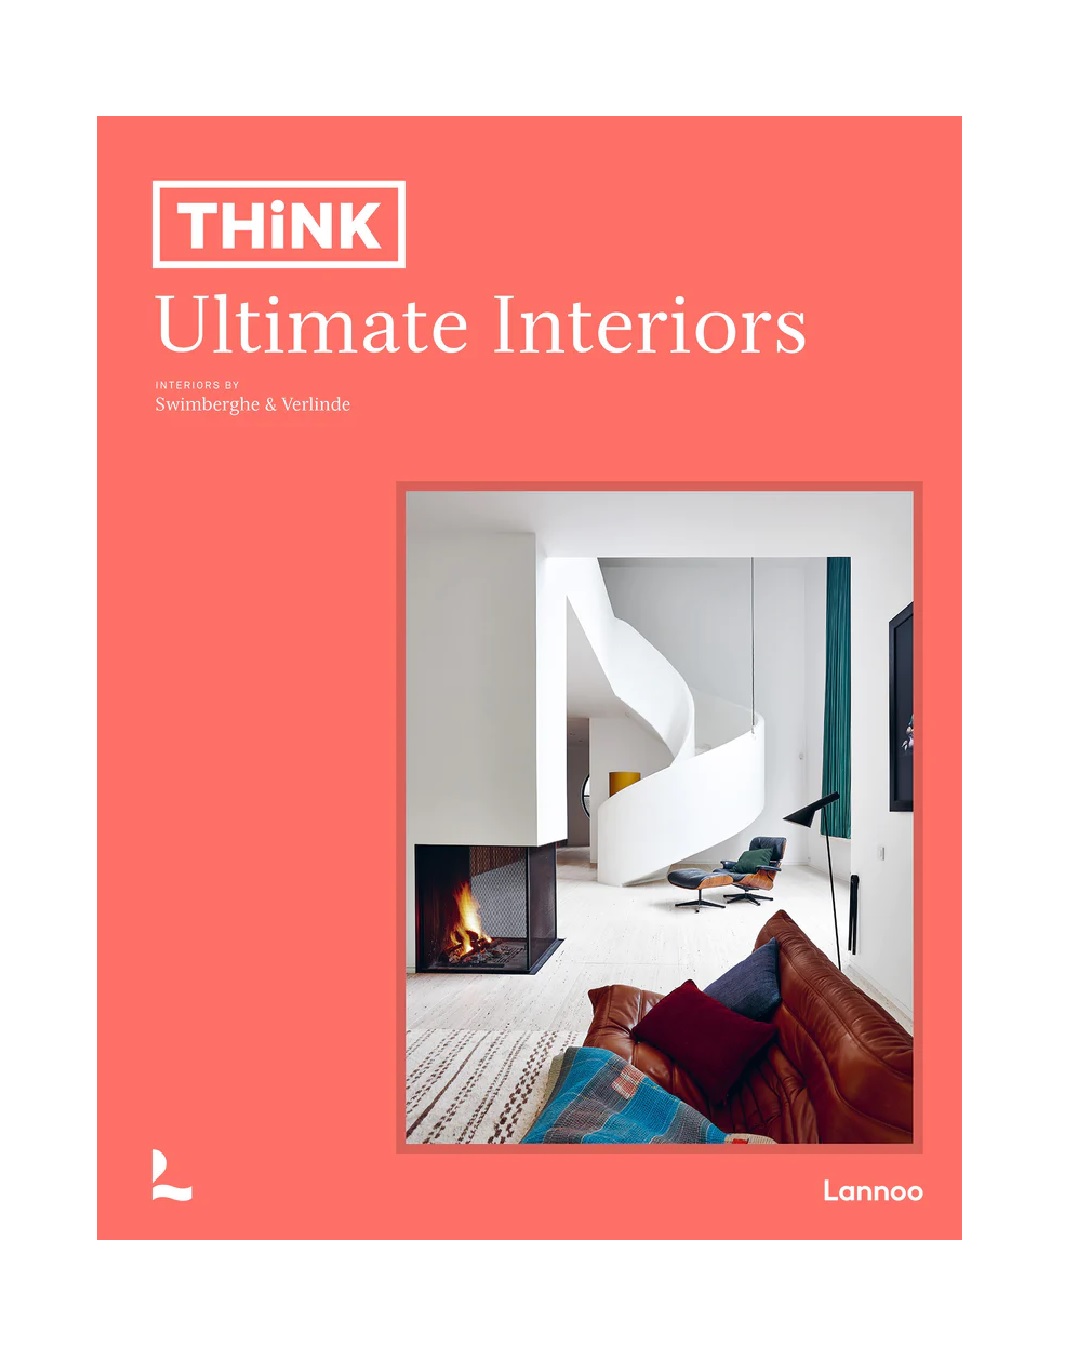 Think ultimate interiors book